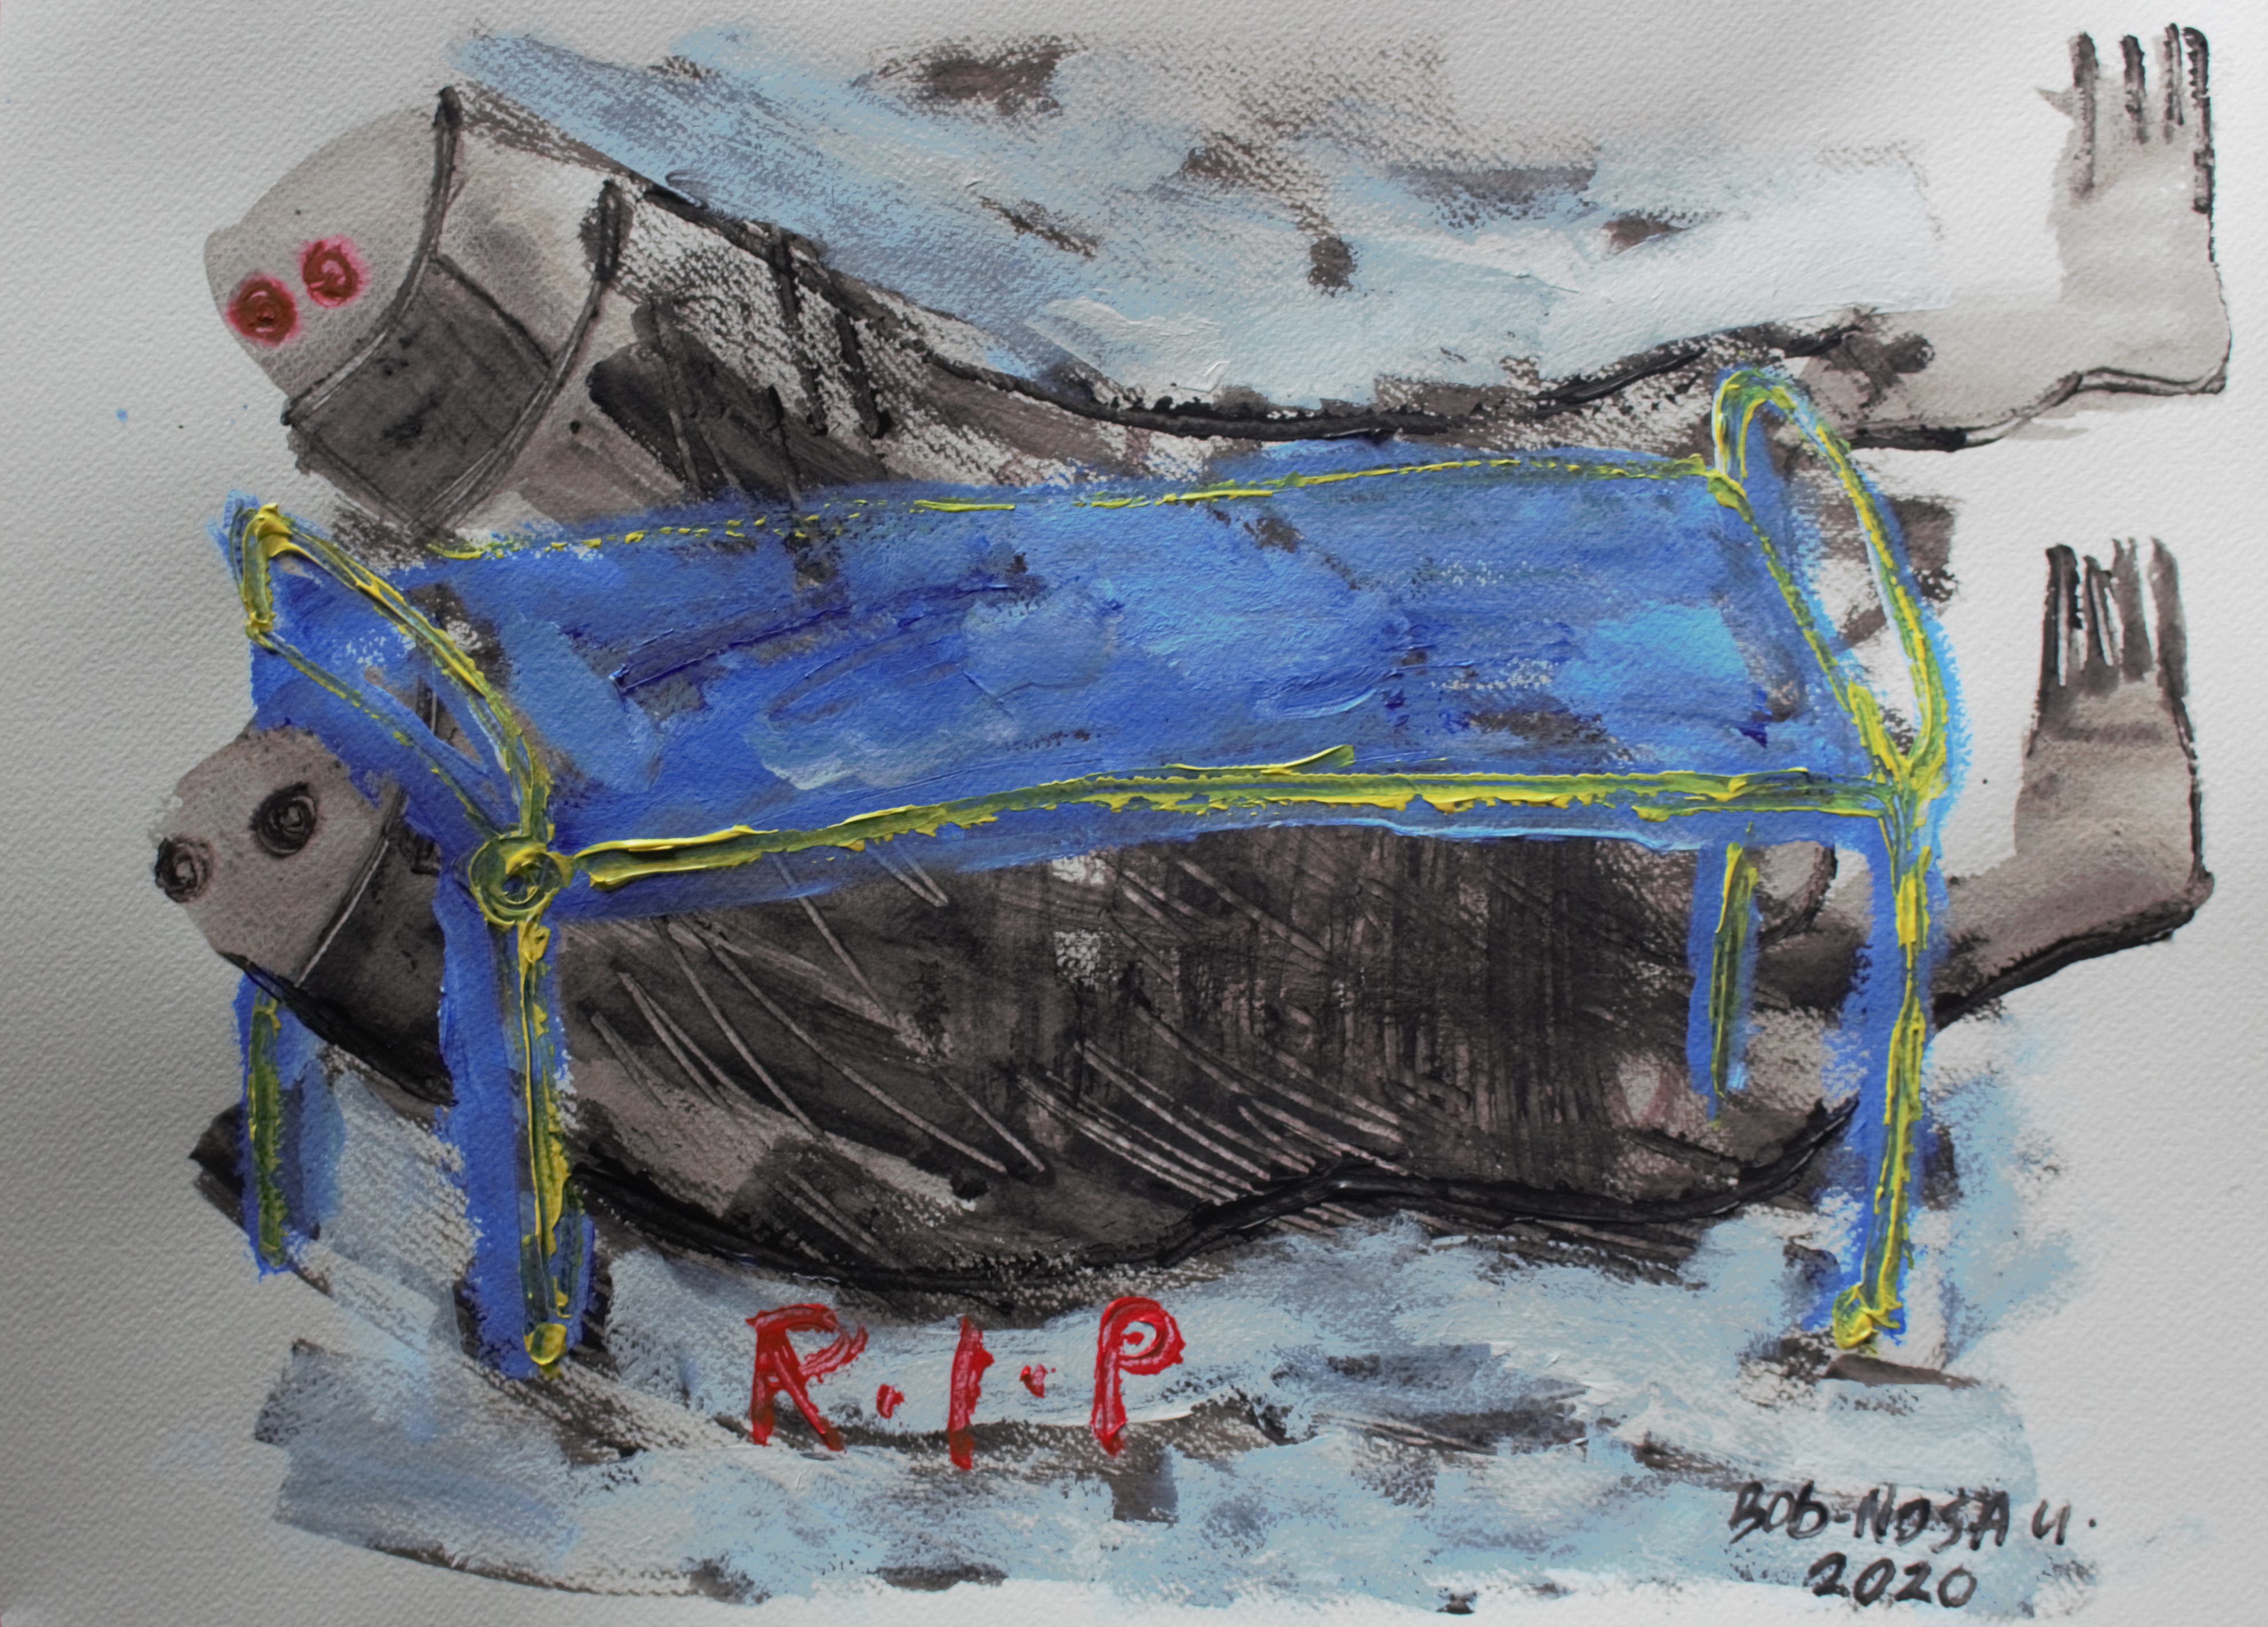 From the series: R.I.P, 2020, acrylic on watercolour paper